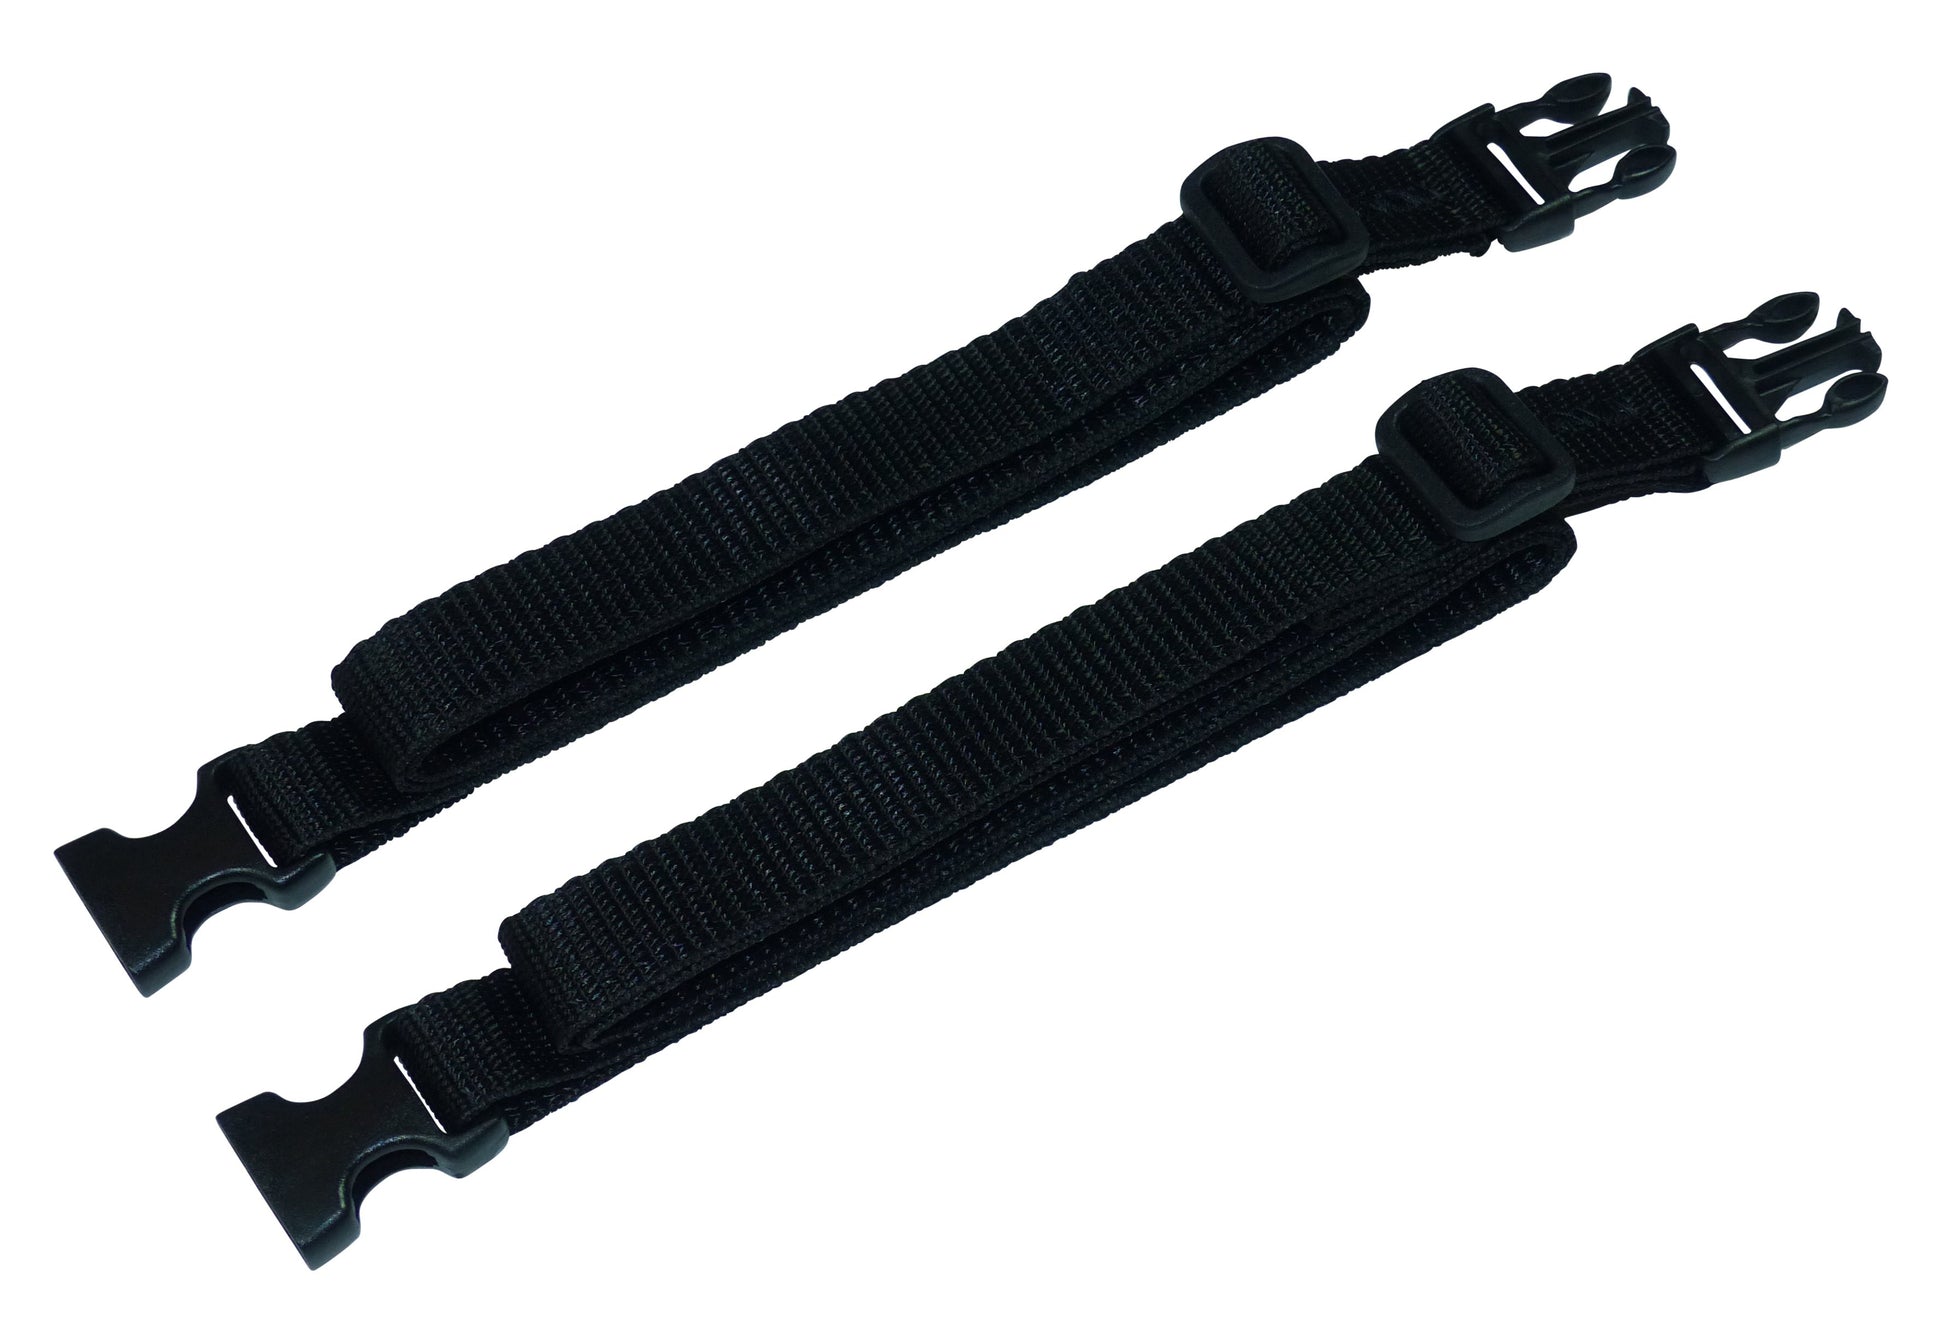 Benristraps 19mm Webbing Strap with Quick Release & Length-Adjusting Buckles (Pair) in black